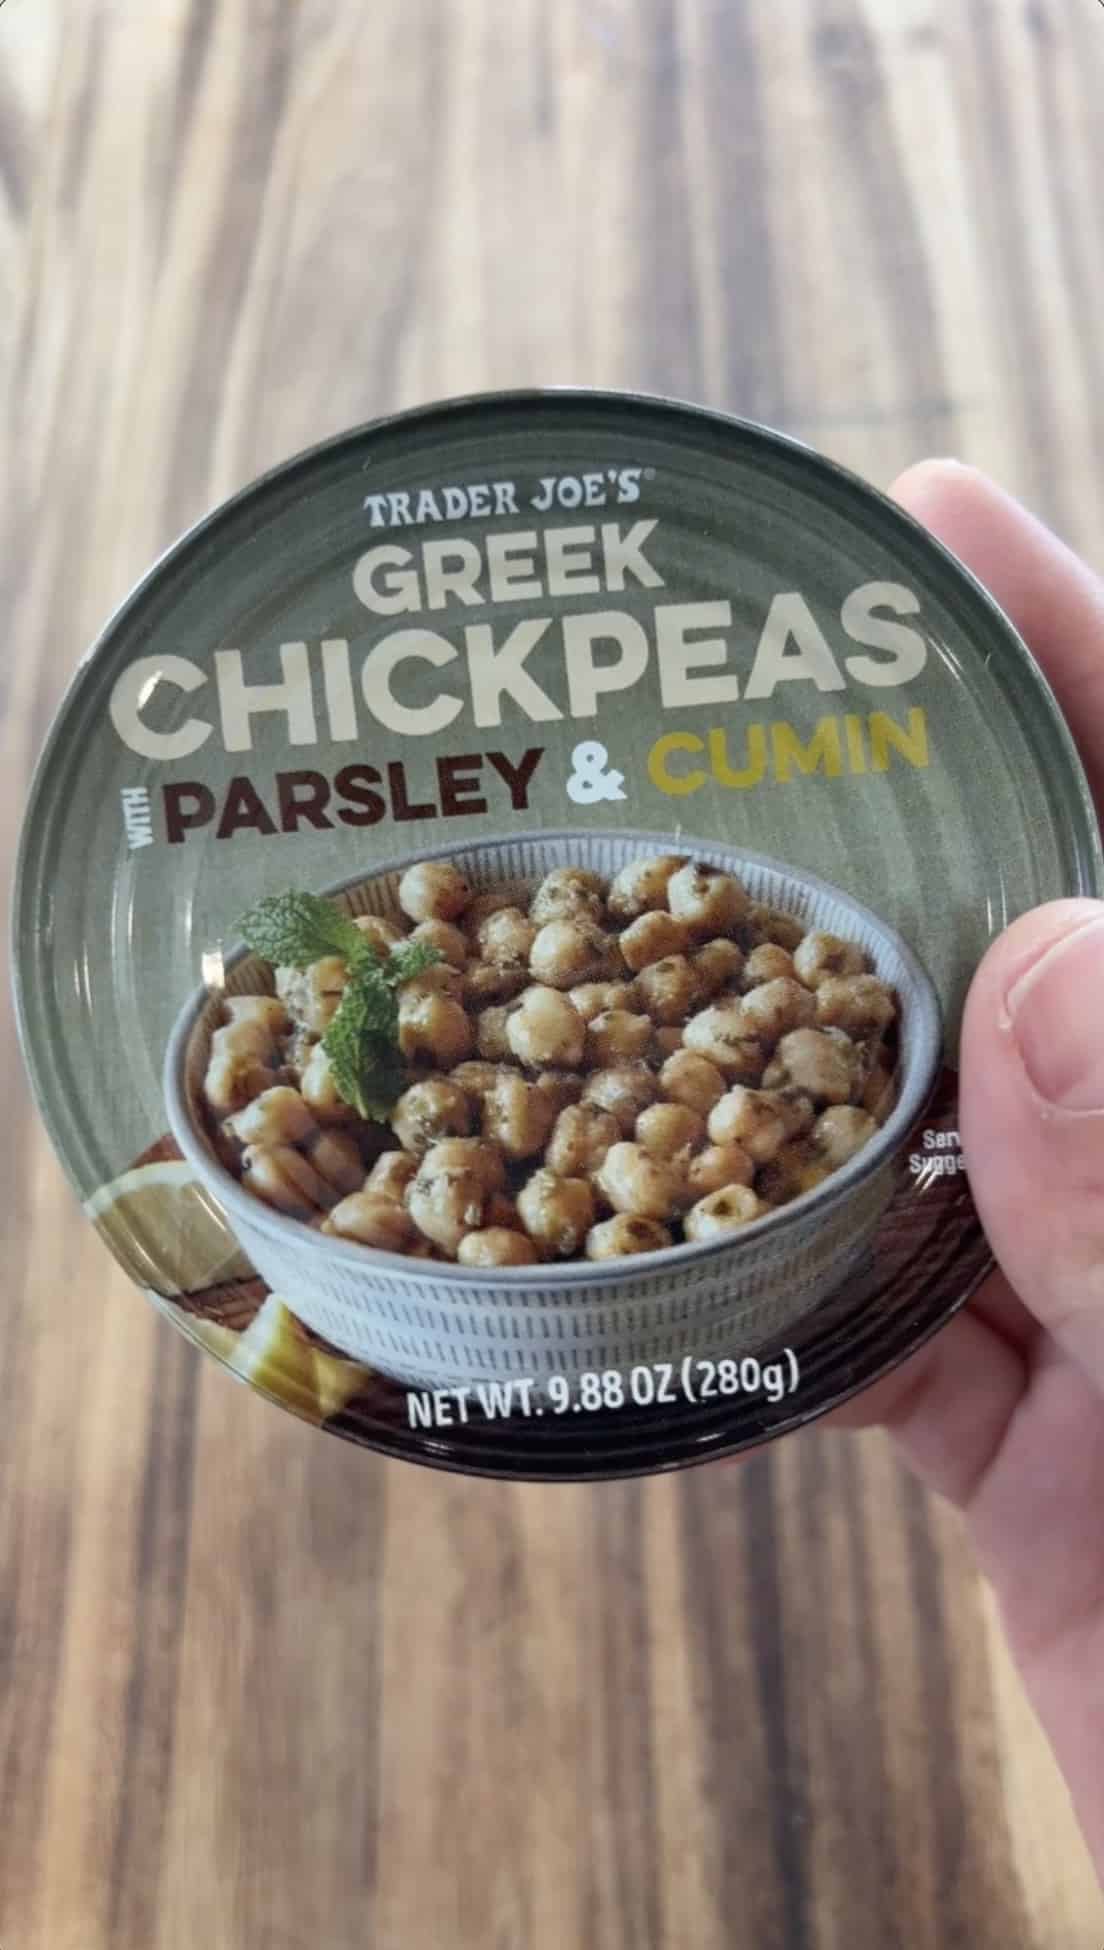 can of trader joe's greek chickpeas with parsley and cumin